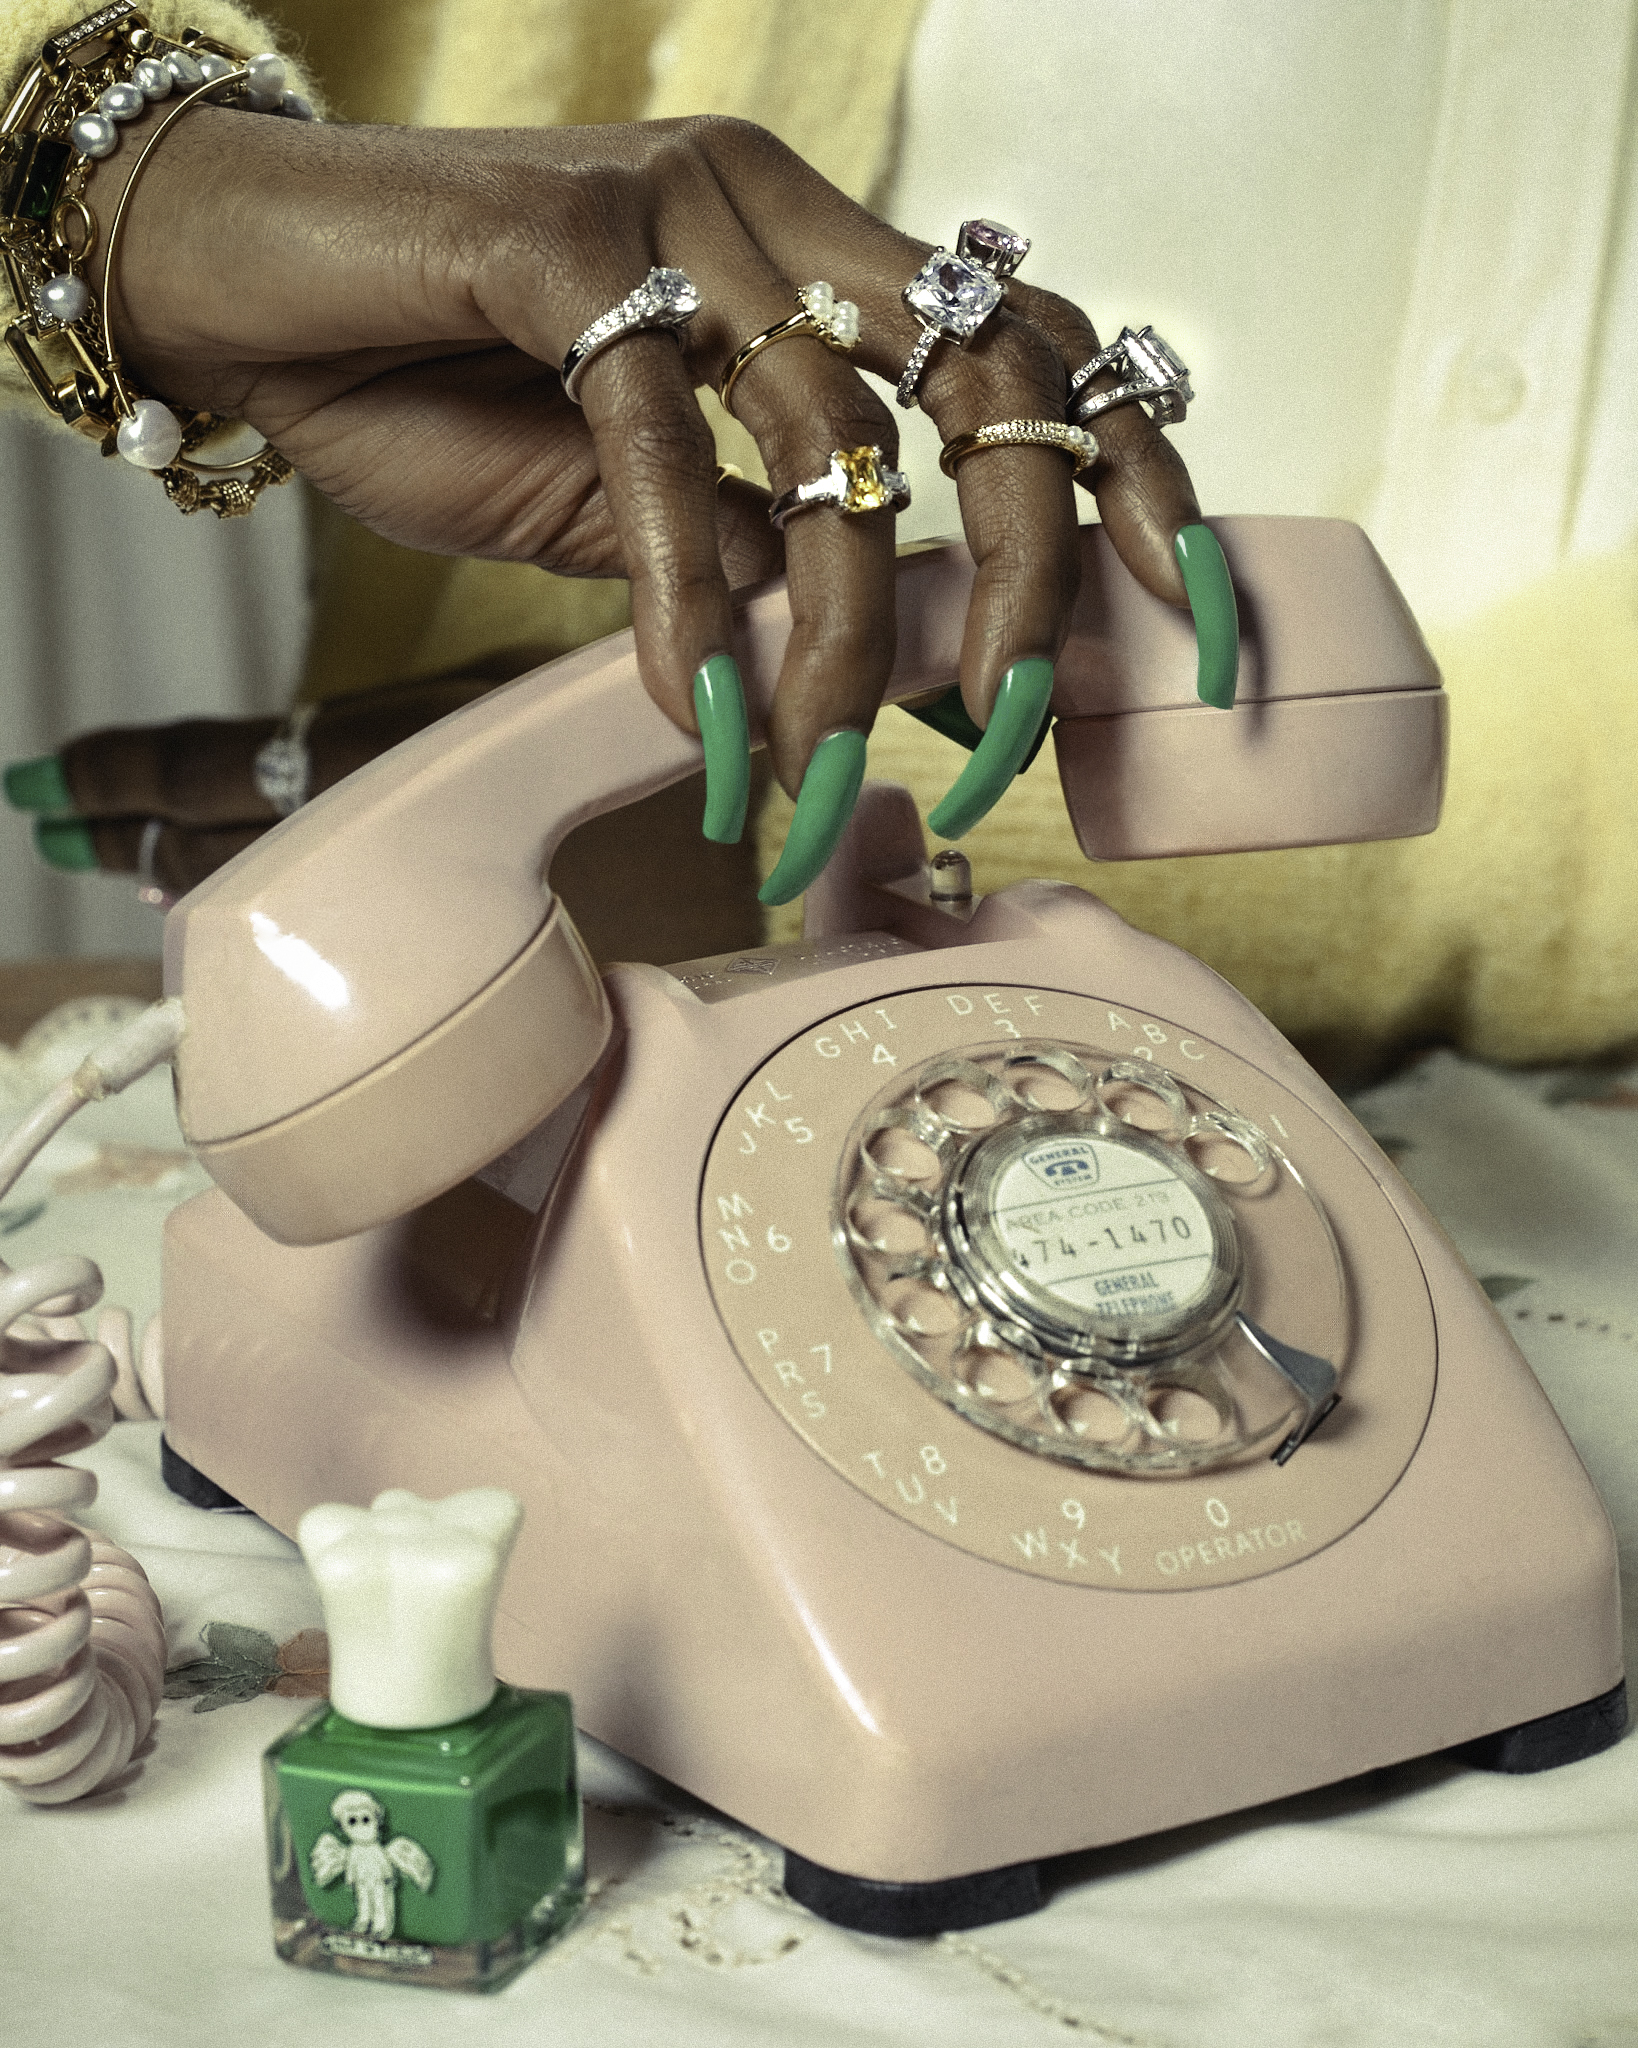 Person&#x27;s hand adorned with multiple rings, holding a vintage telephone receiver, next to a nail polish bottle